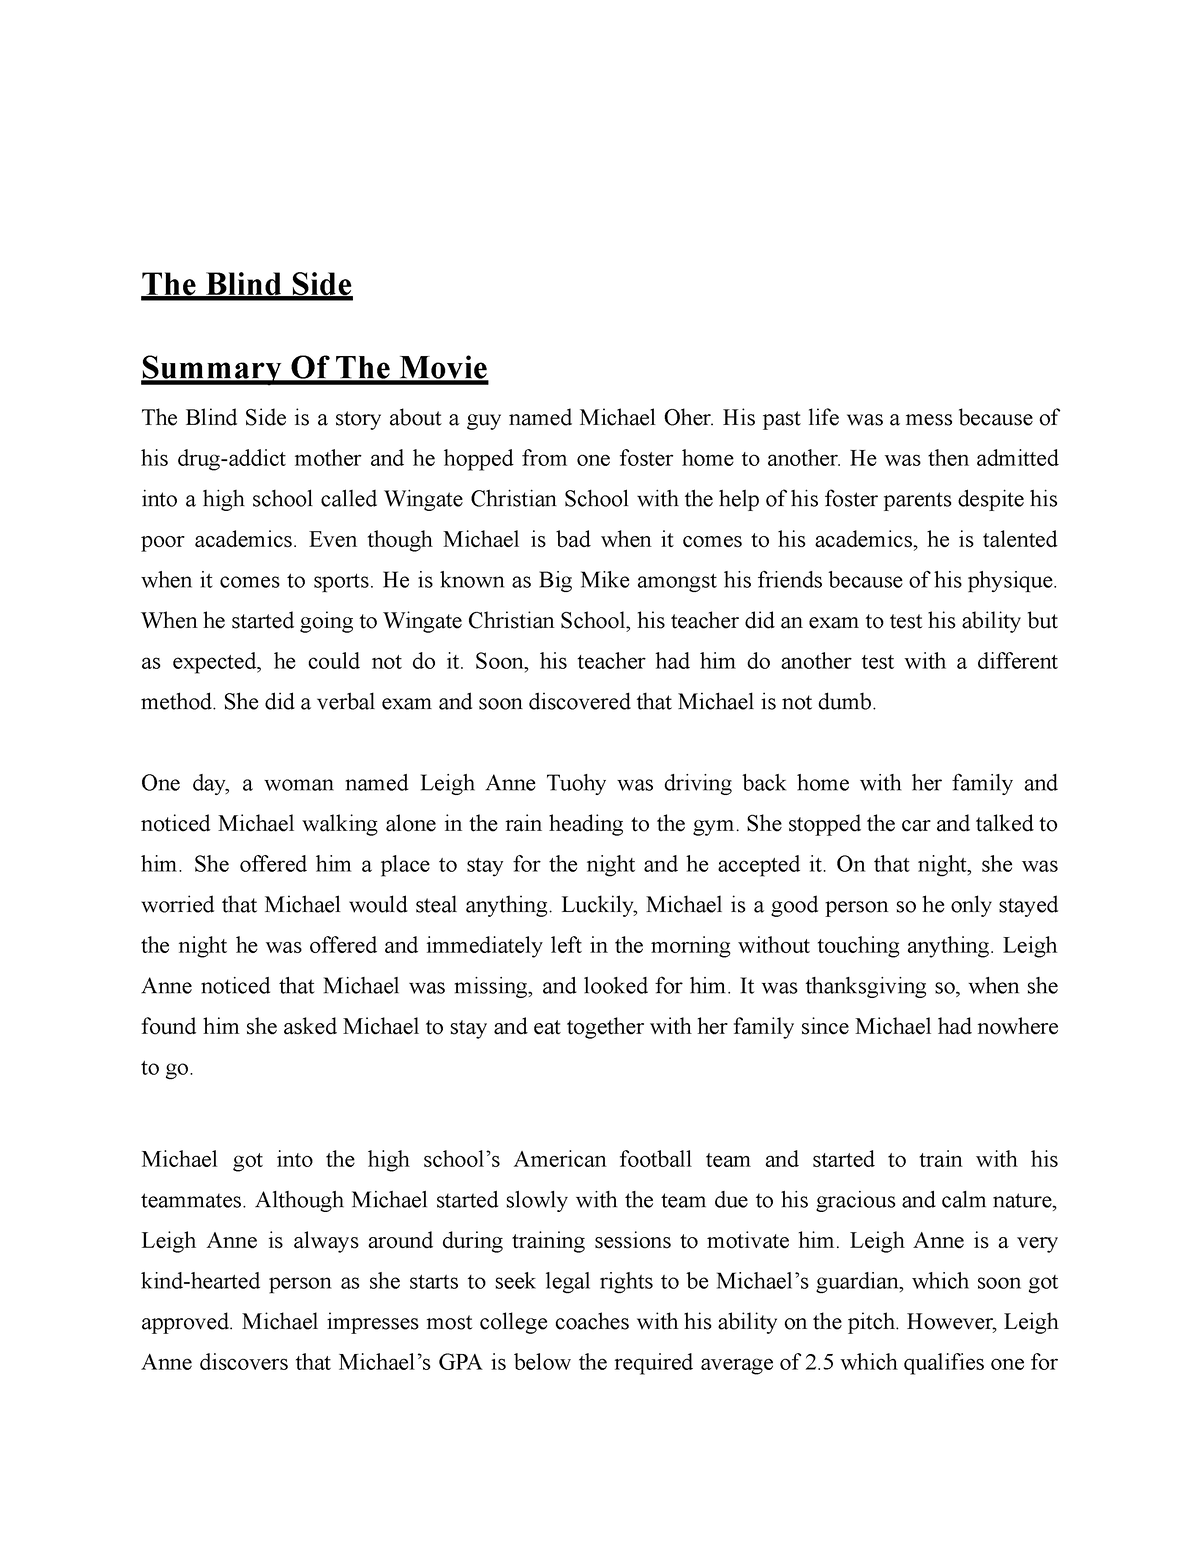 the blind side book summary essay